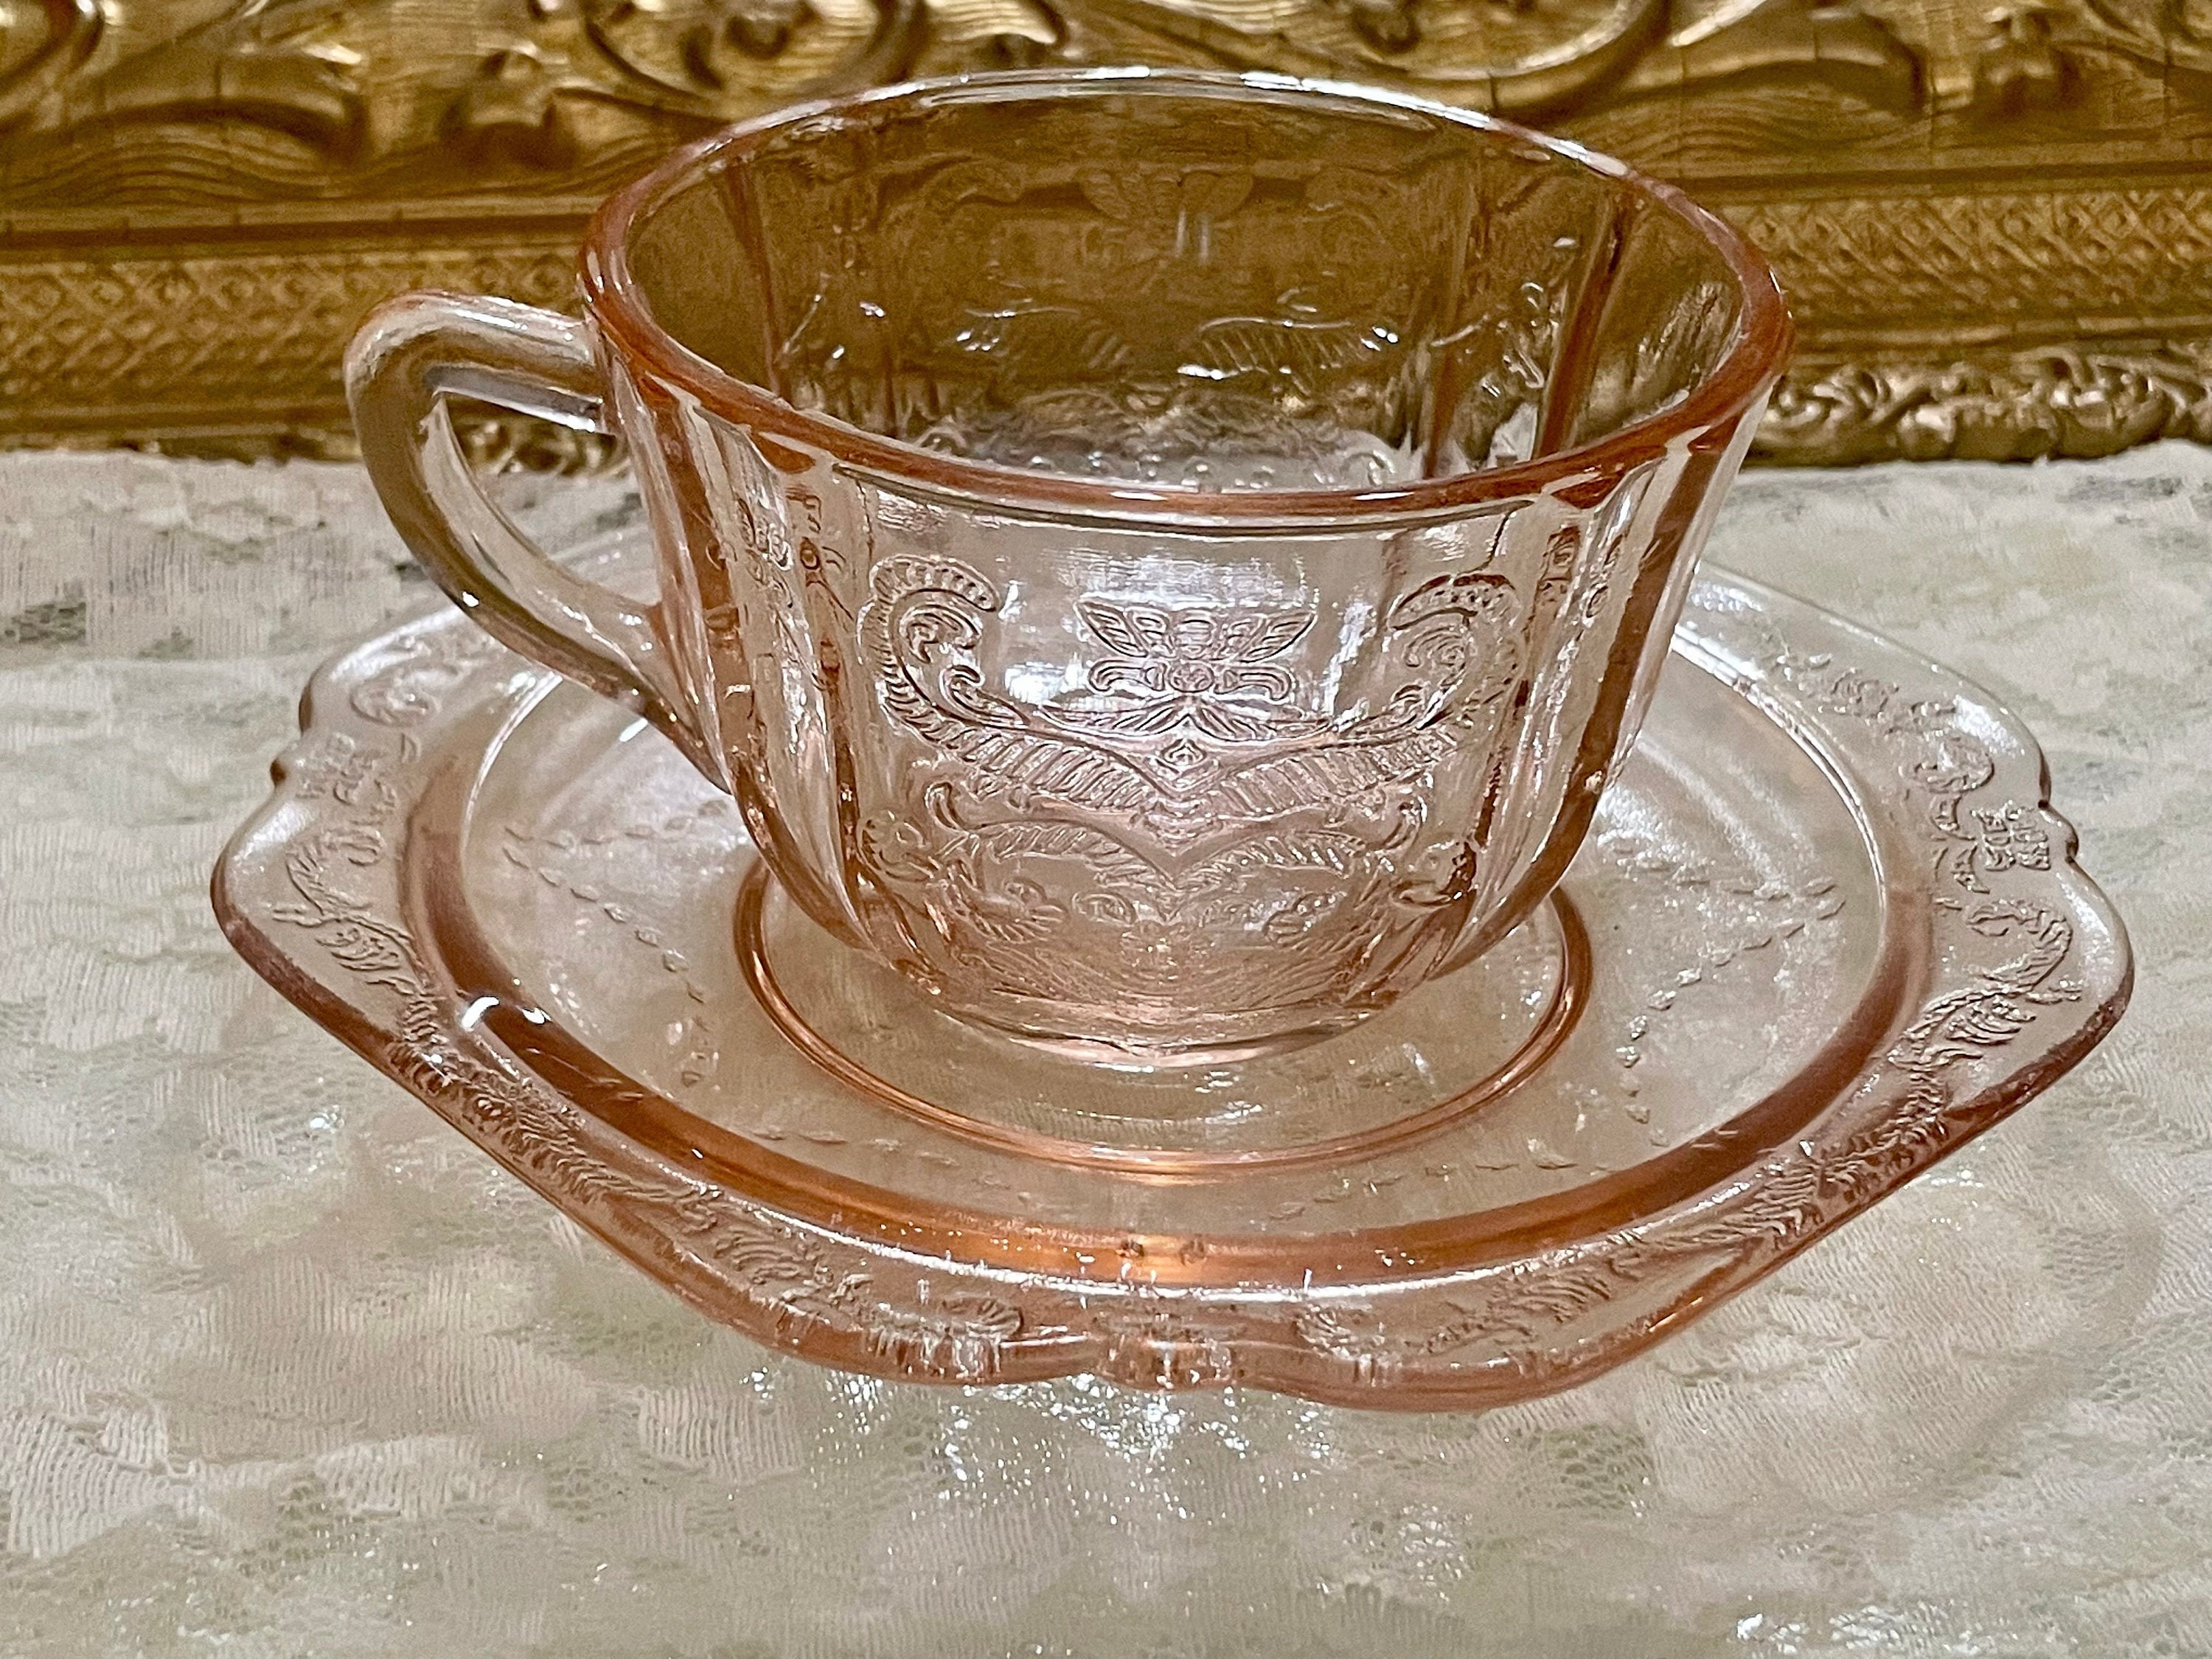 Antique Pink Depression Glass Square Optic Tea Cup and Saucer Set